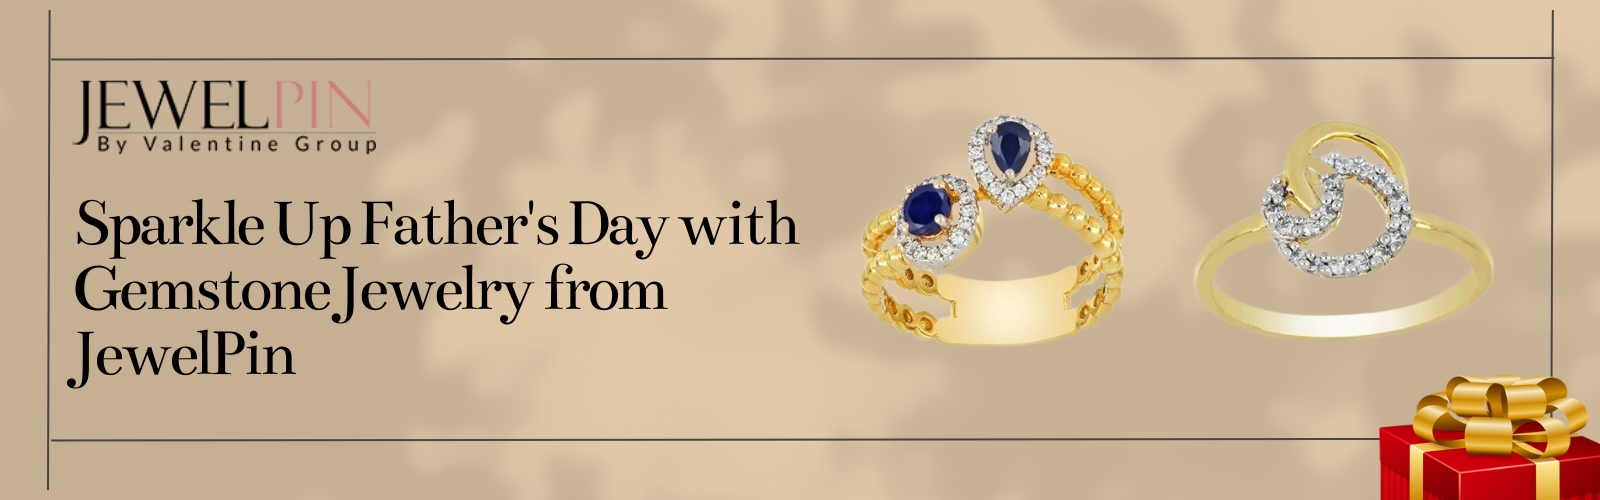 Sparkle Up Father's Day with Gemstone Jewellery from JewelPin